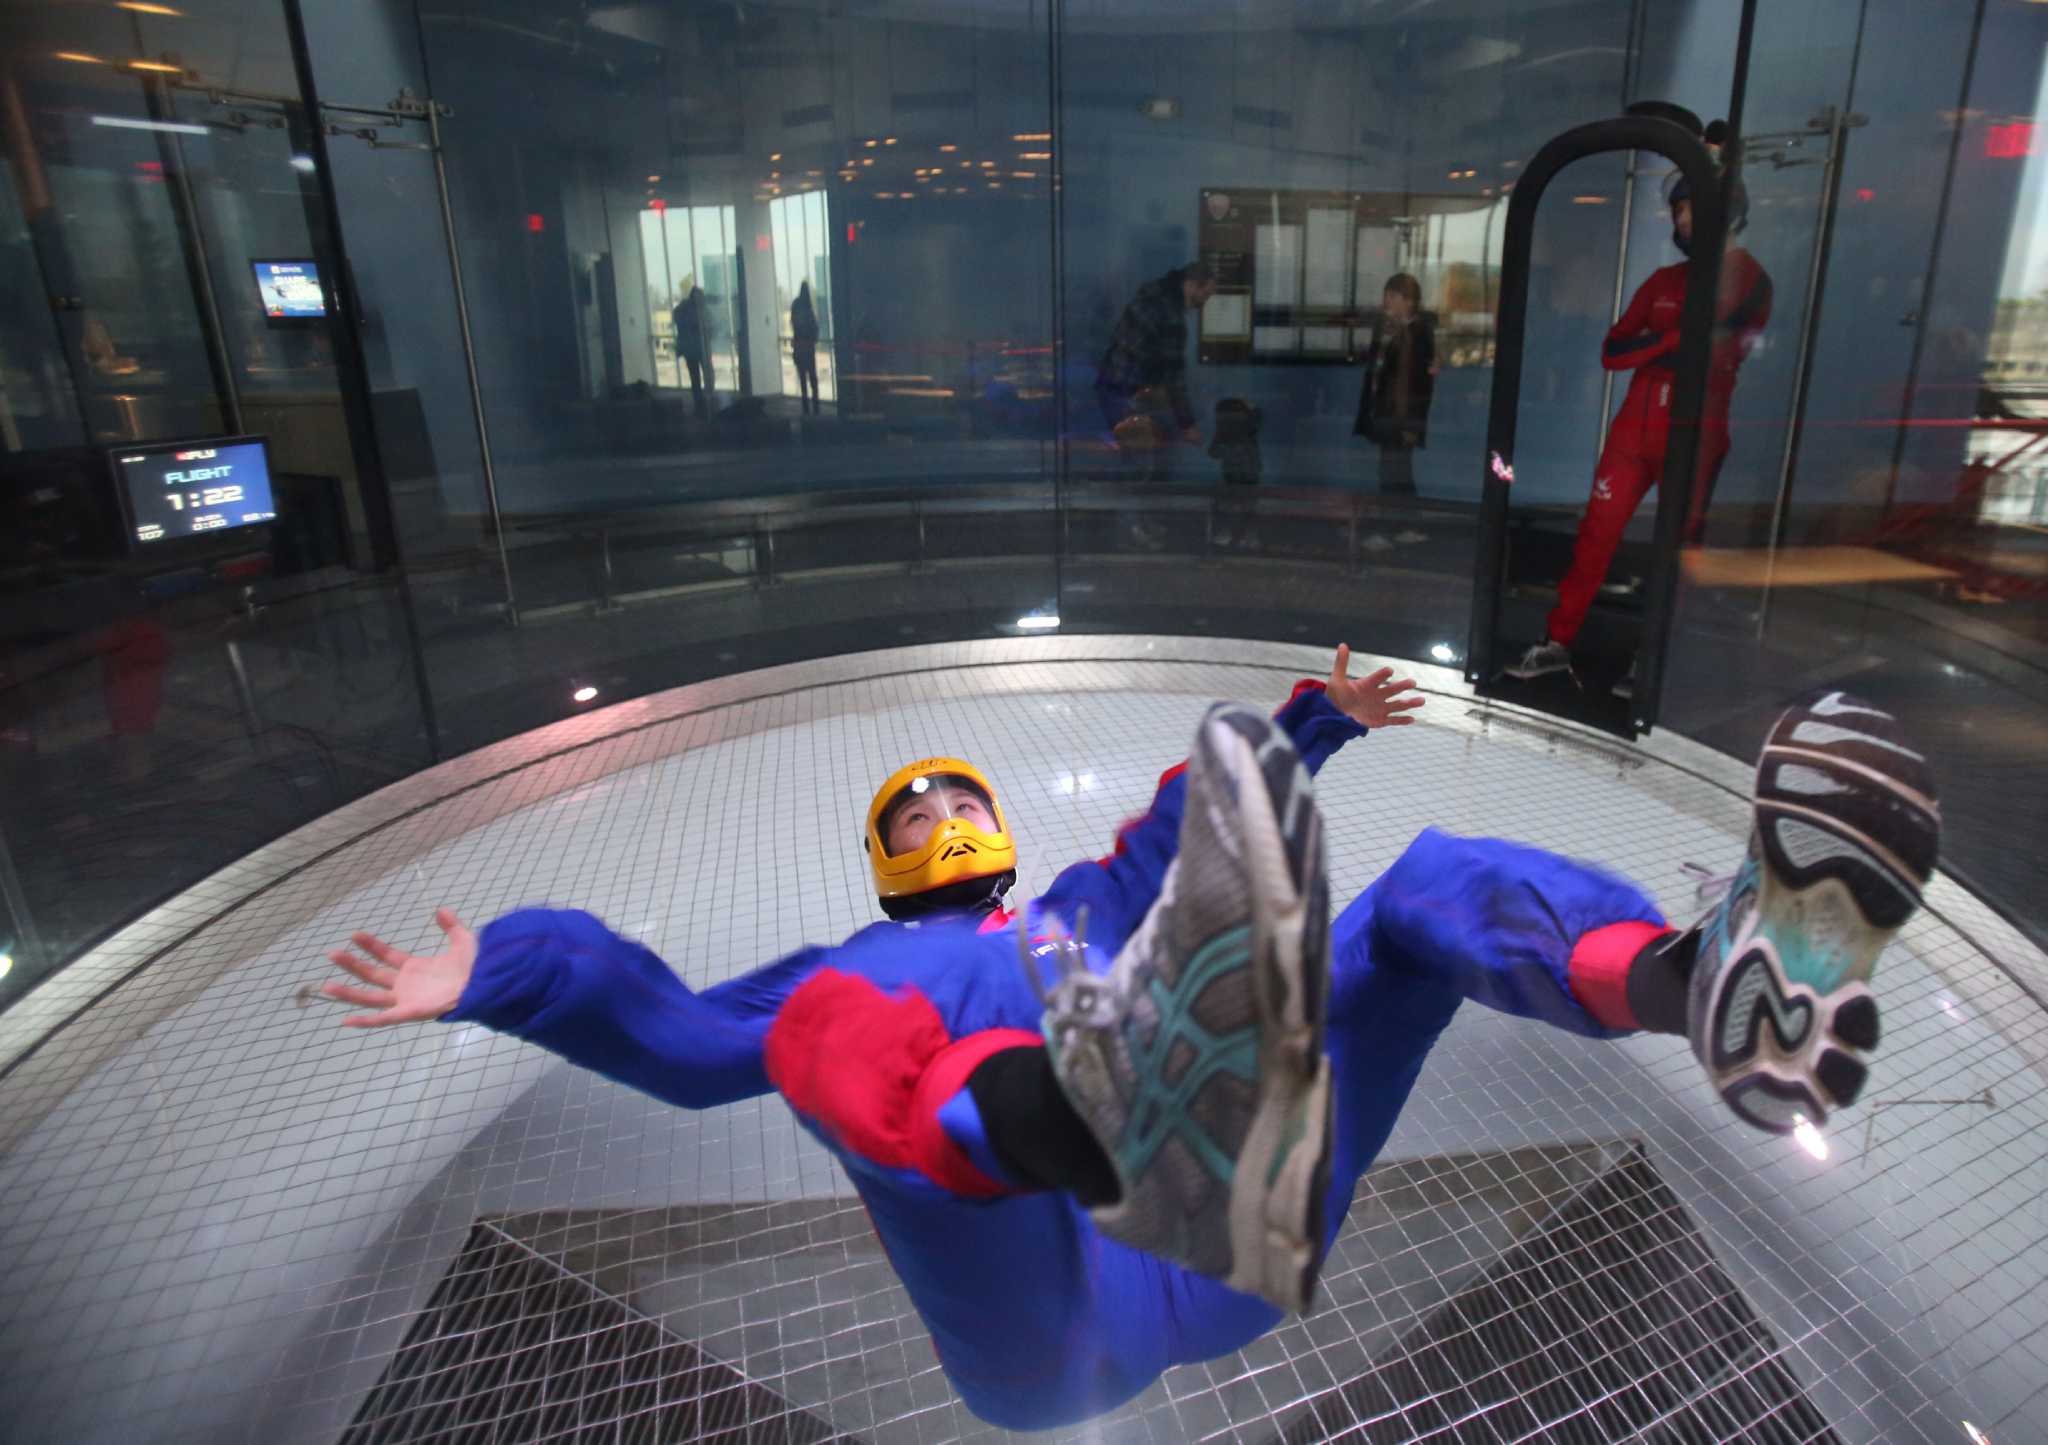 iFLY indoor skydiving facility offers freefalling fun Houston Chronicle